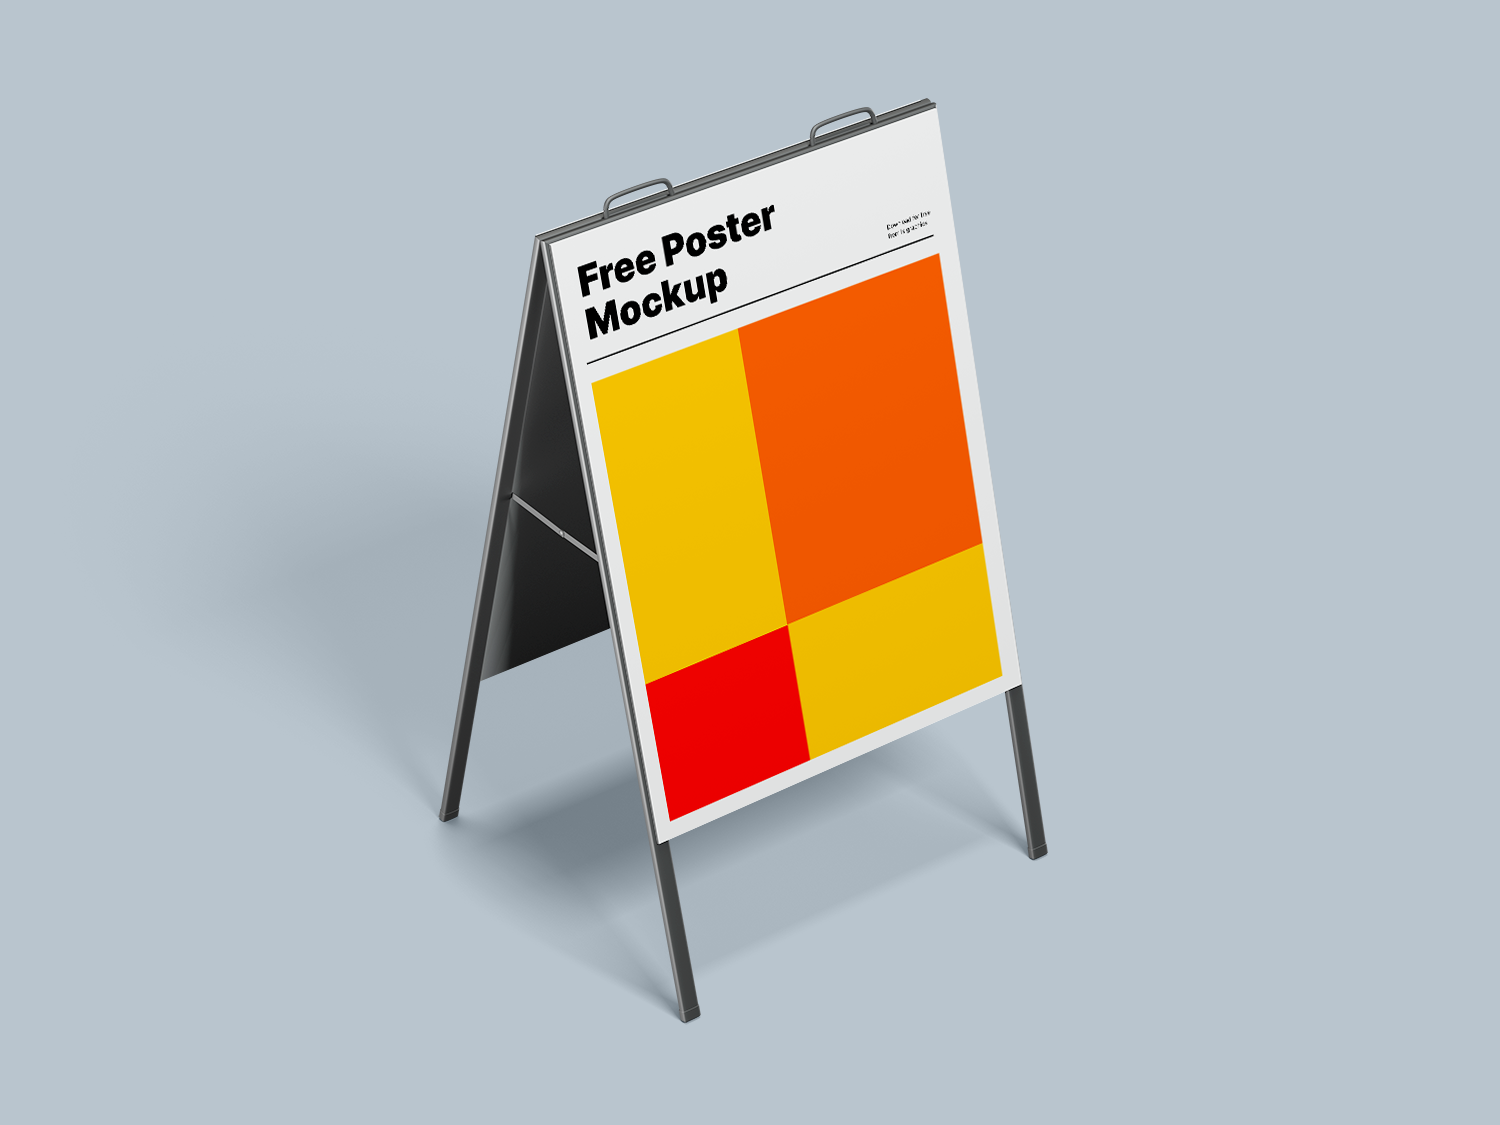 Download Signs and Billboard Mockups, Best Free Mockups | Free Mockups, Best Free PSD Mockups - ApeMockups